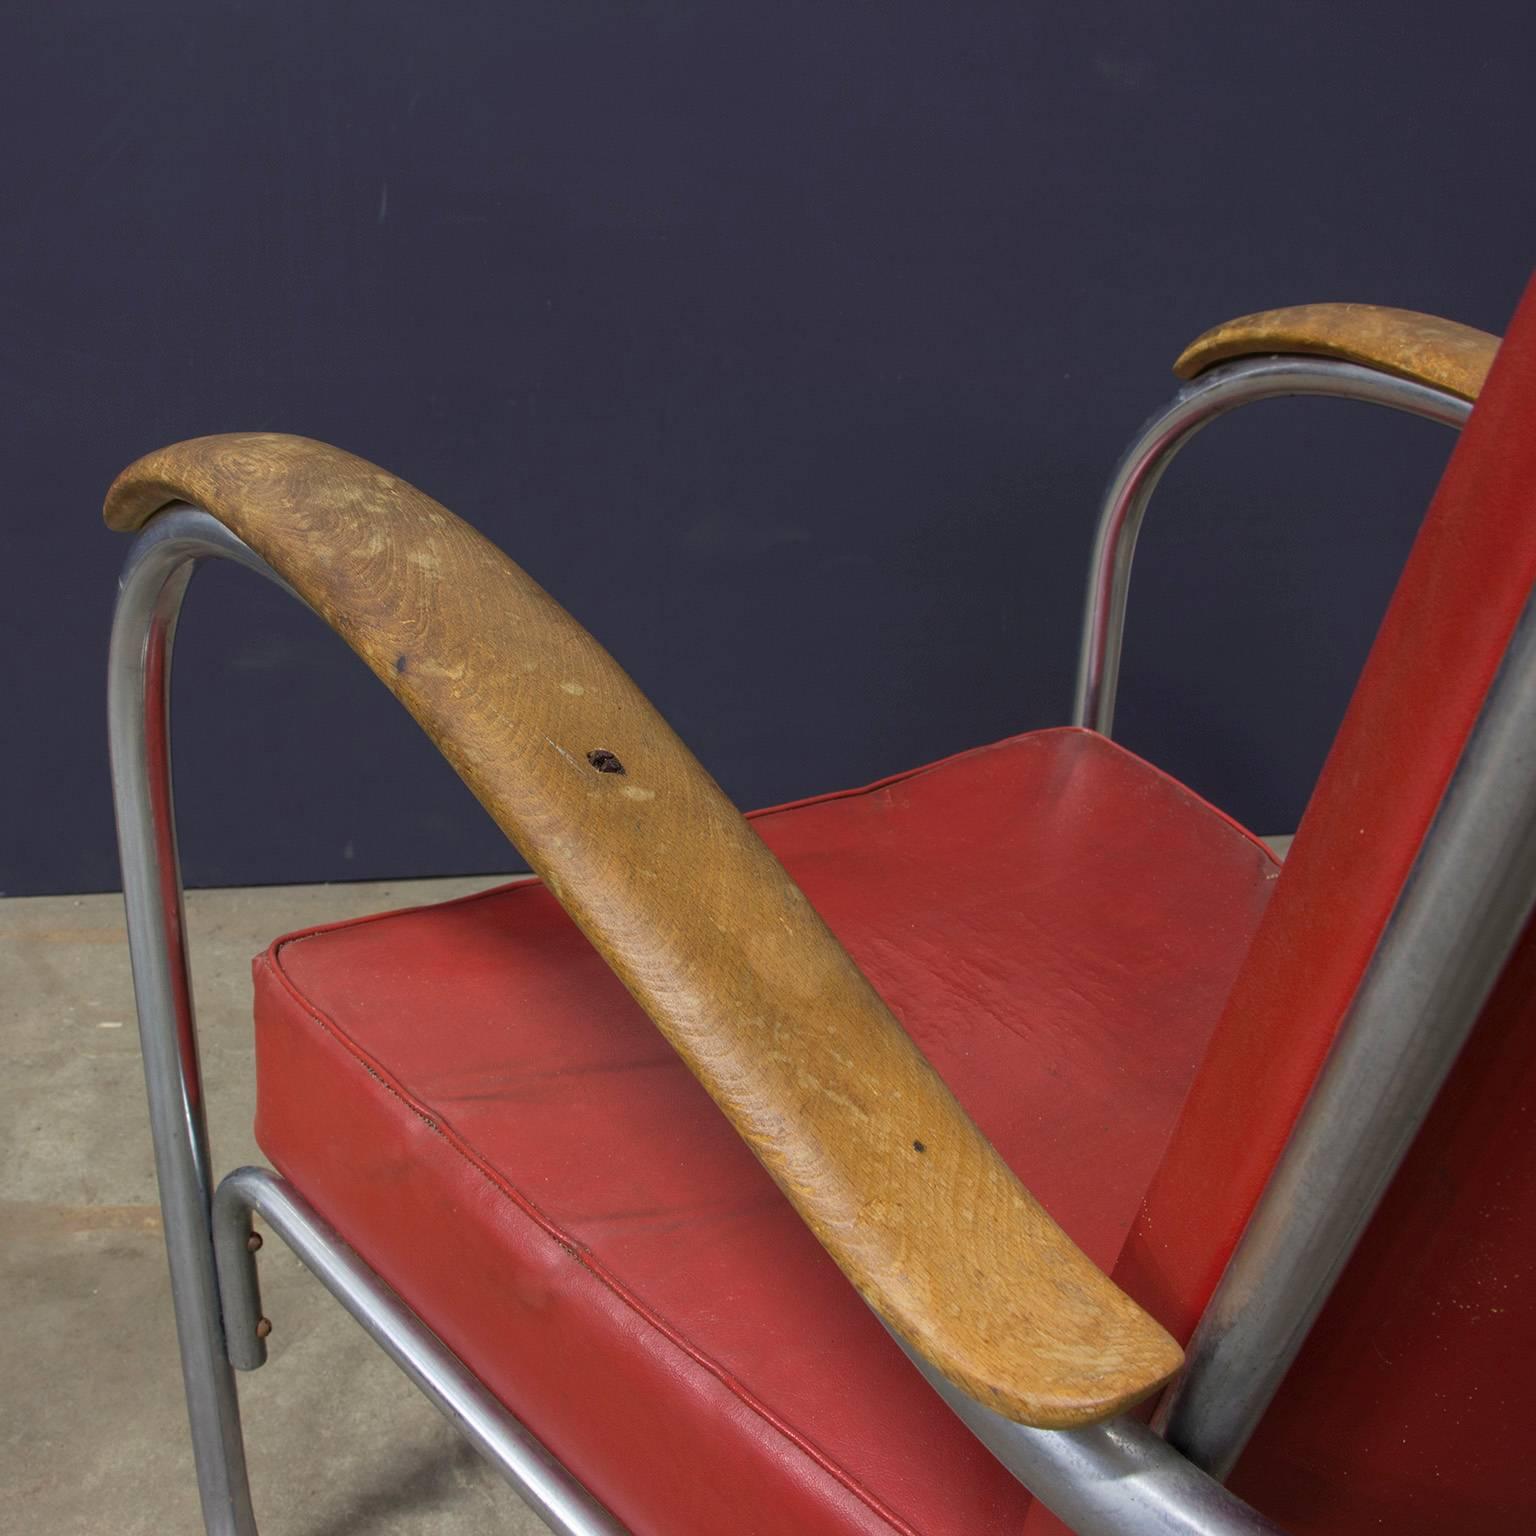 Steel 1932, W.H. Gispen for Gispen, a Complete Original 412 Chair with Wooden Armrests